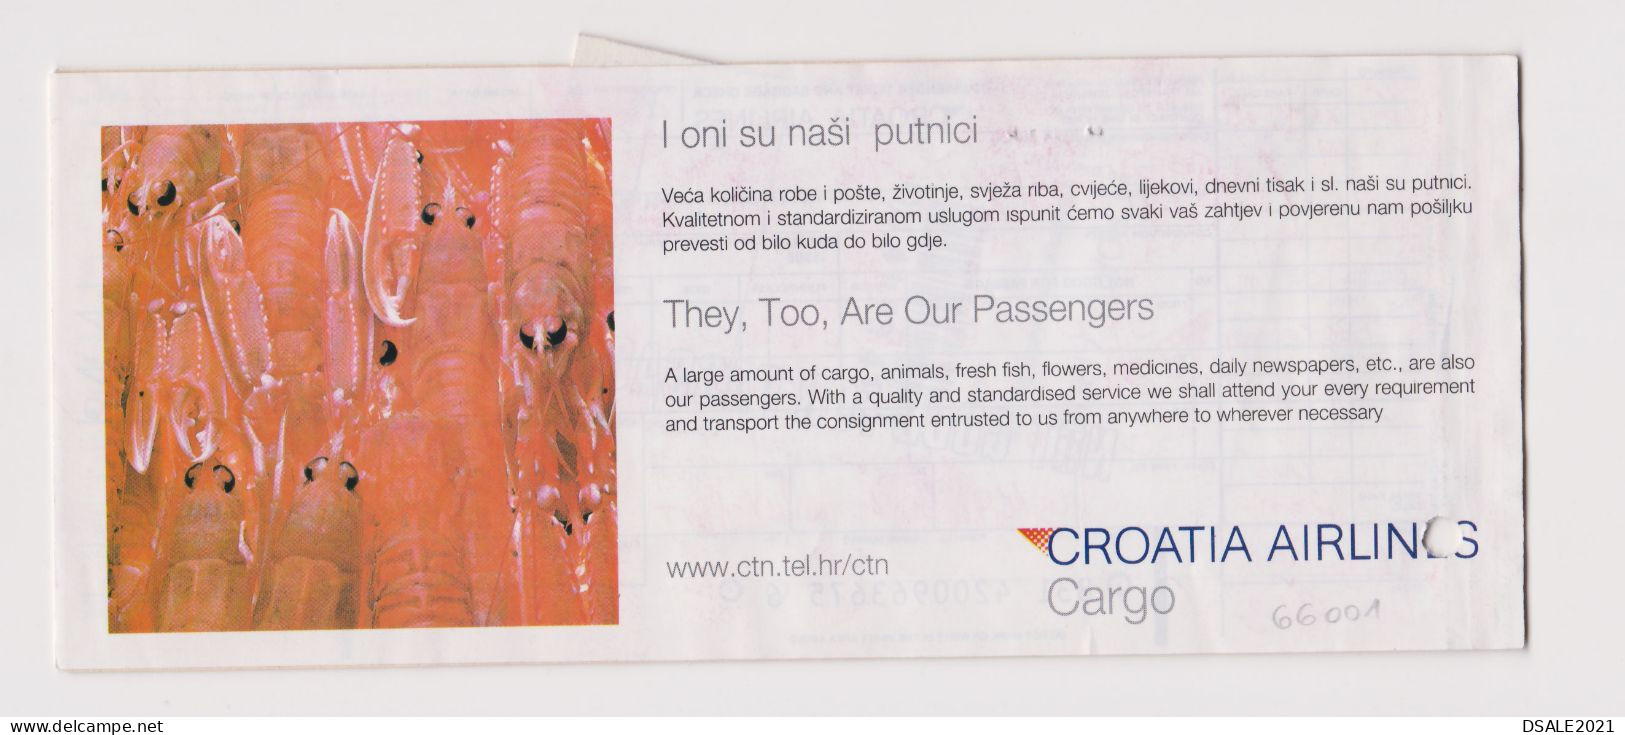 CROATIA AIRLINES, Croatian Airline Carrier Passenger Ticket And Baggage Check Used (66001) - Biglietti